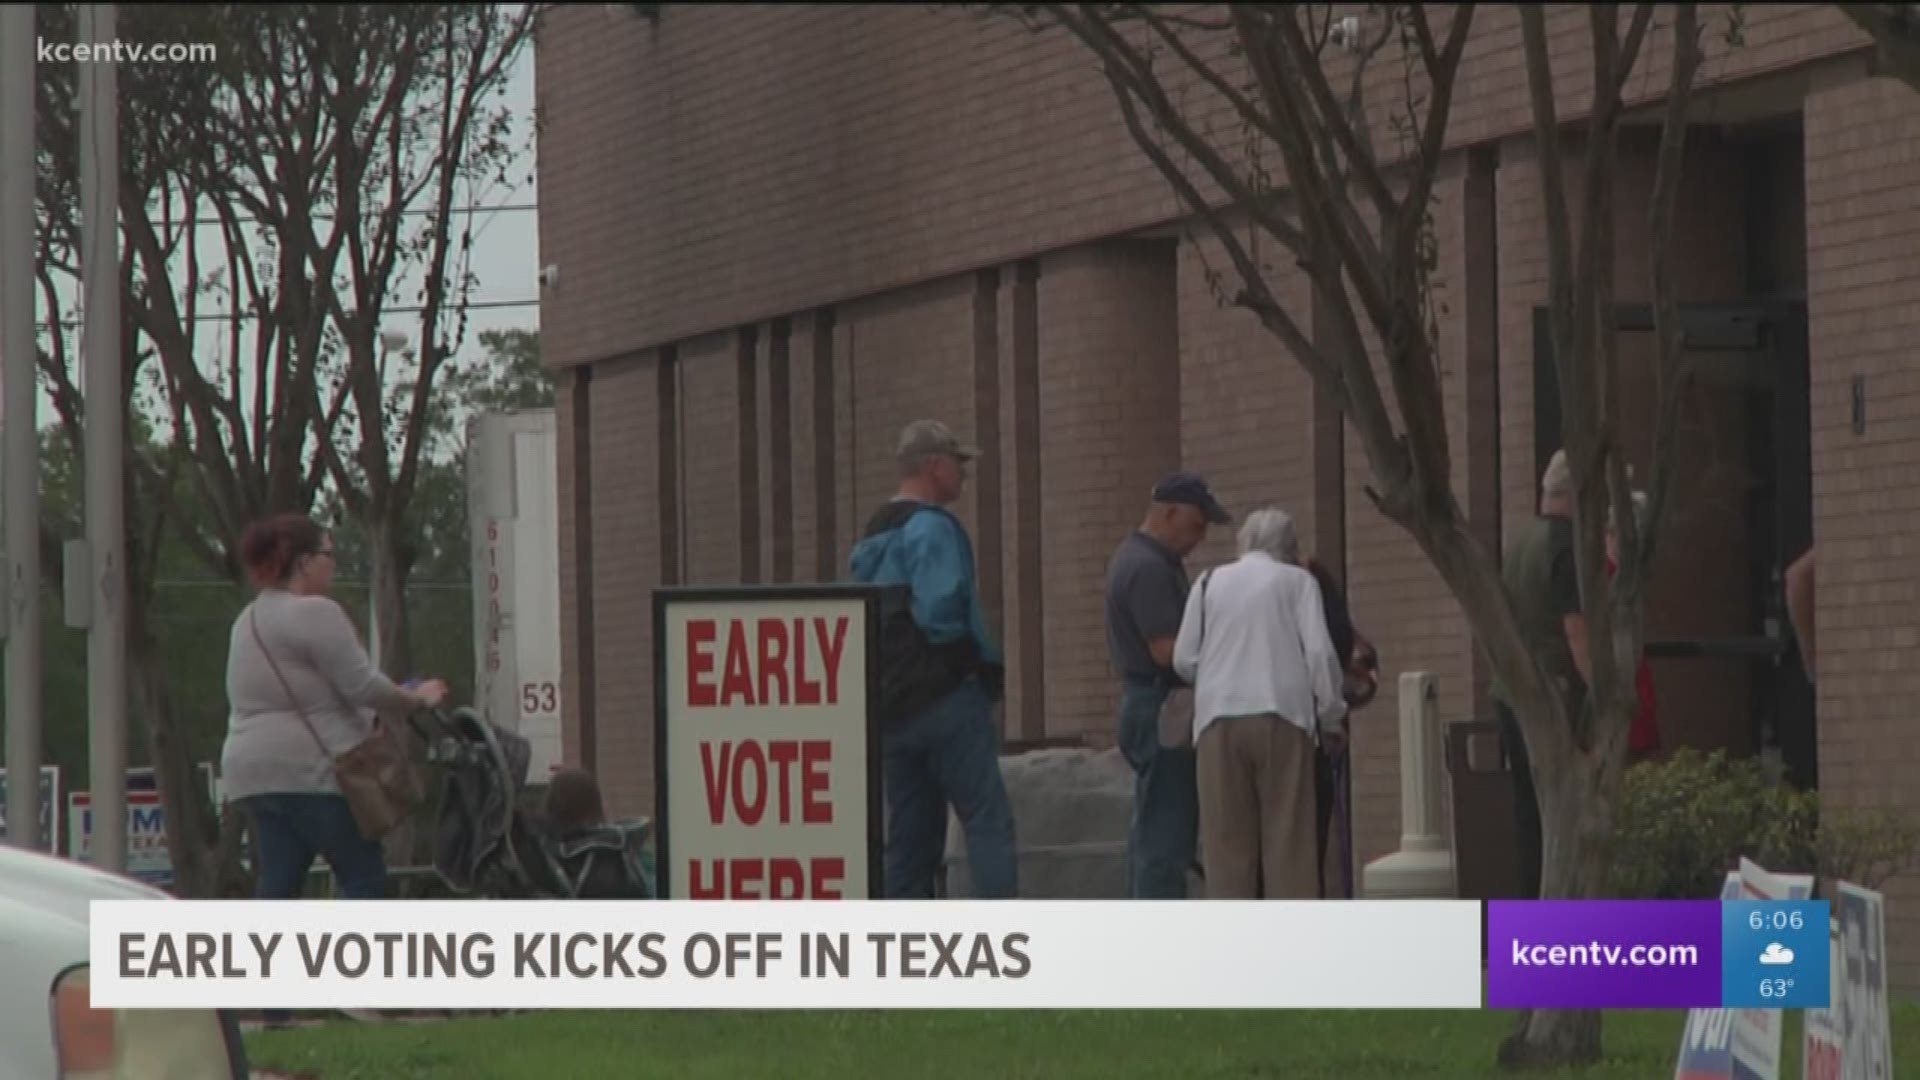 Early voting kicks off in Texas